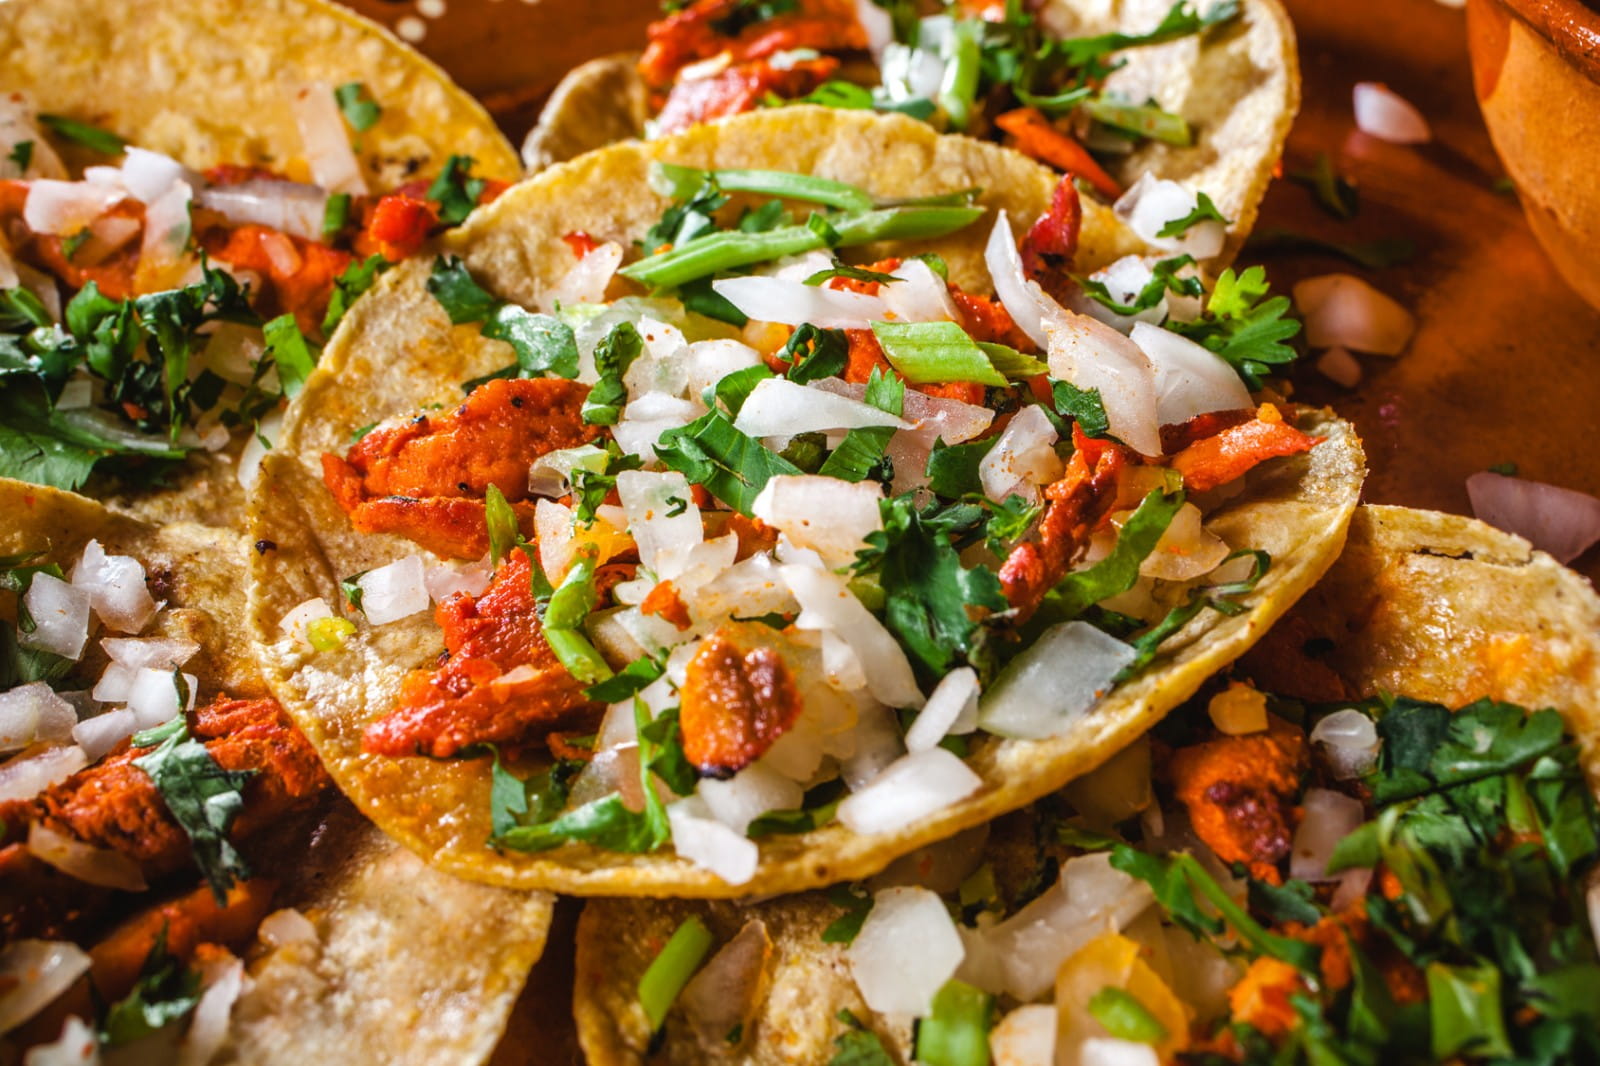 Wine, beer and other pairings with Mexican food